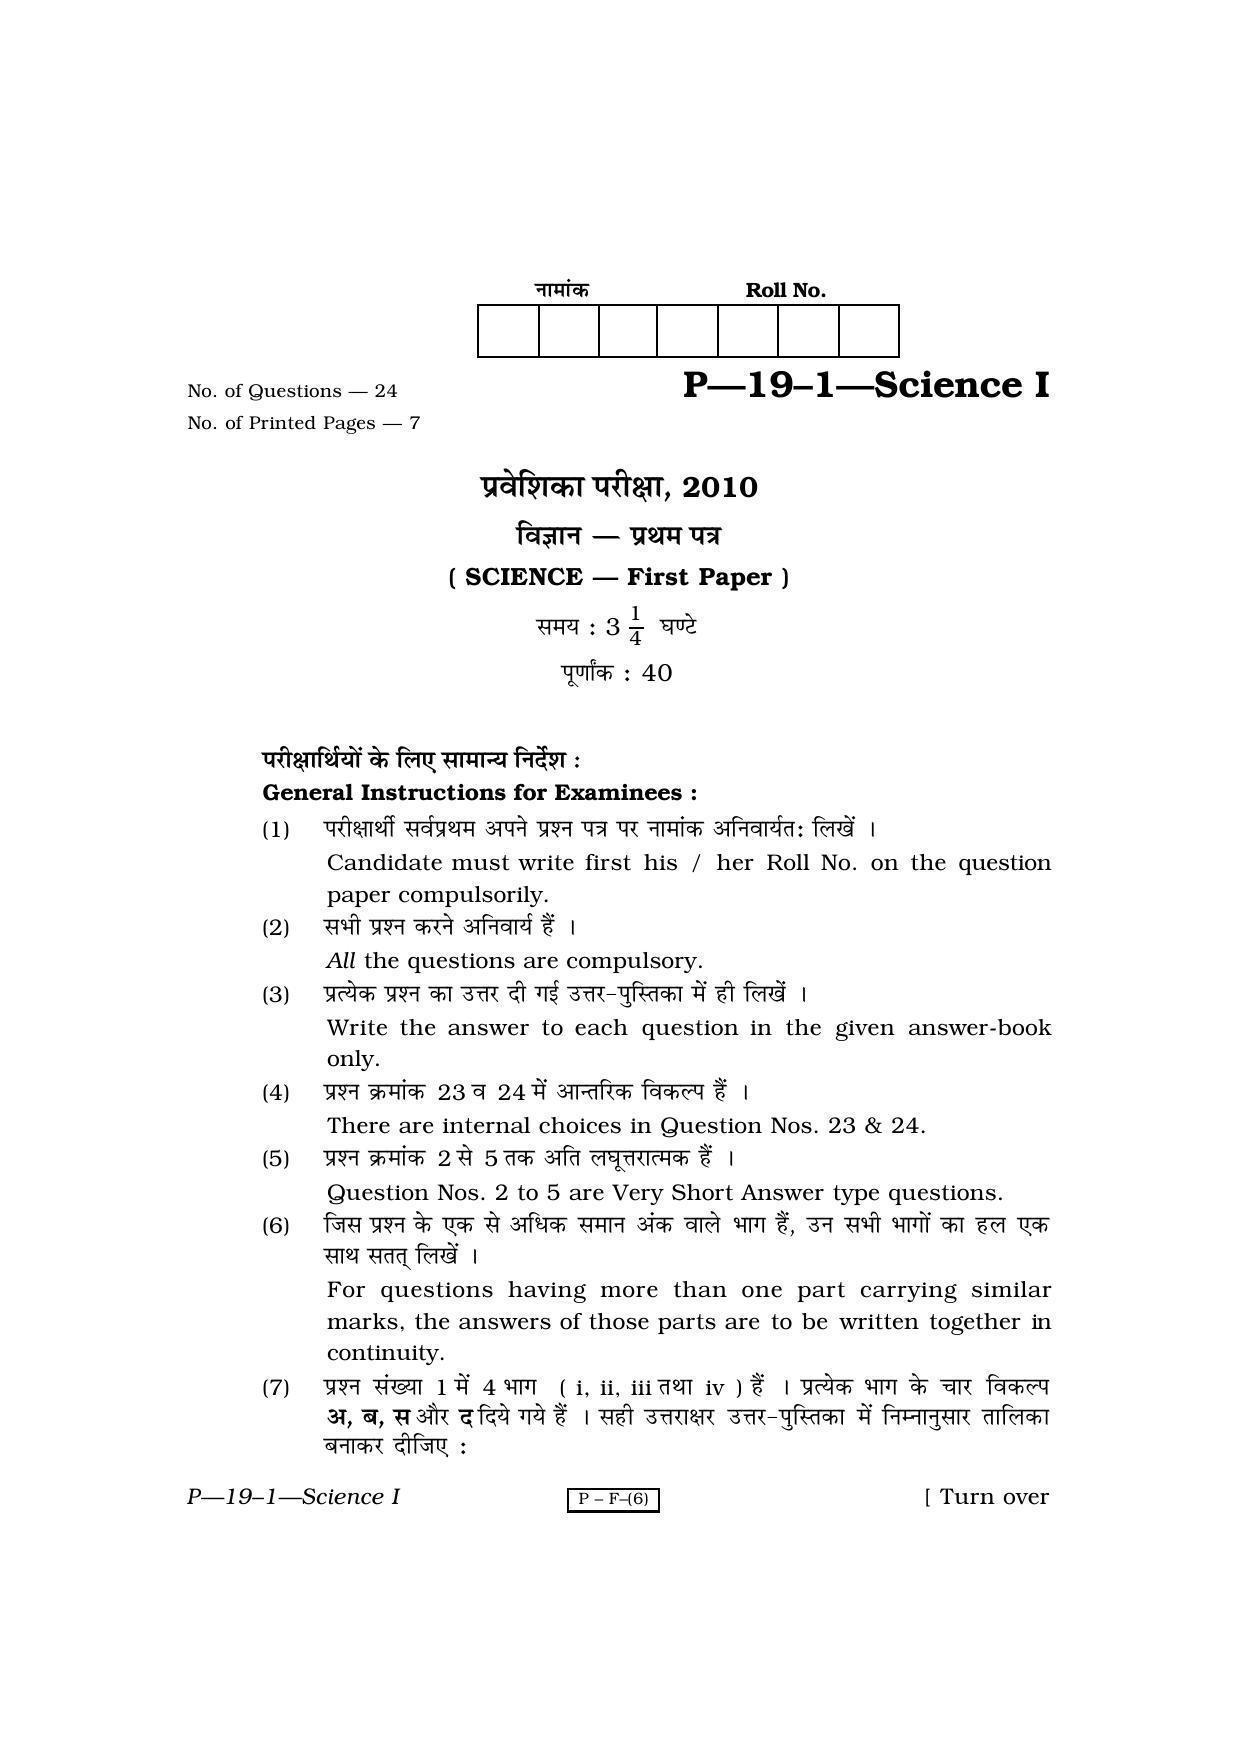 RBSE 2010 Science - I Praveshika Question Paper - Page 1